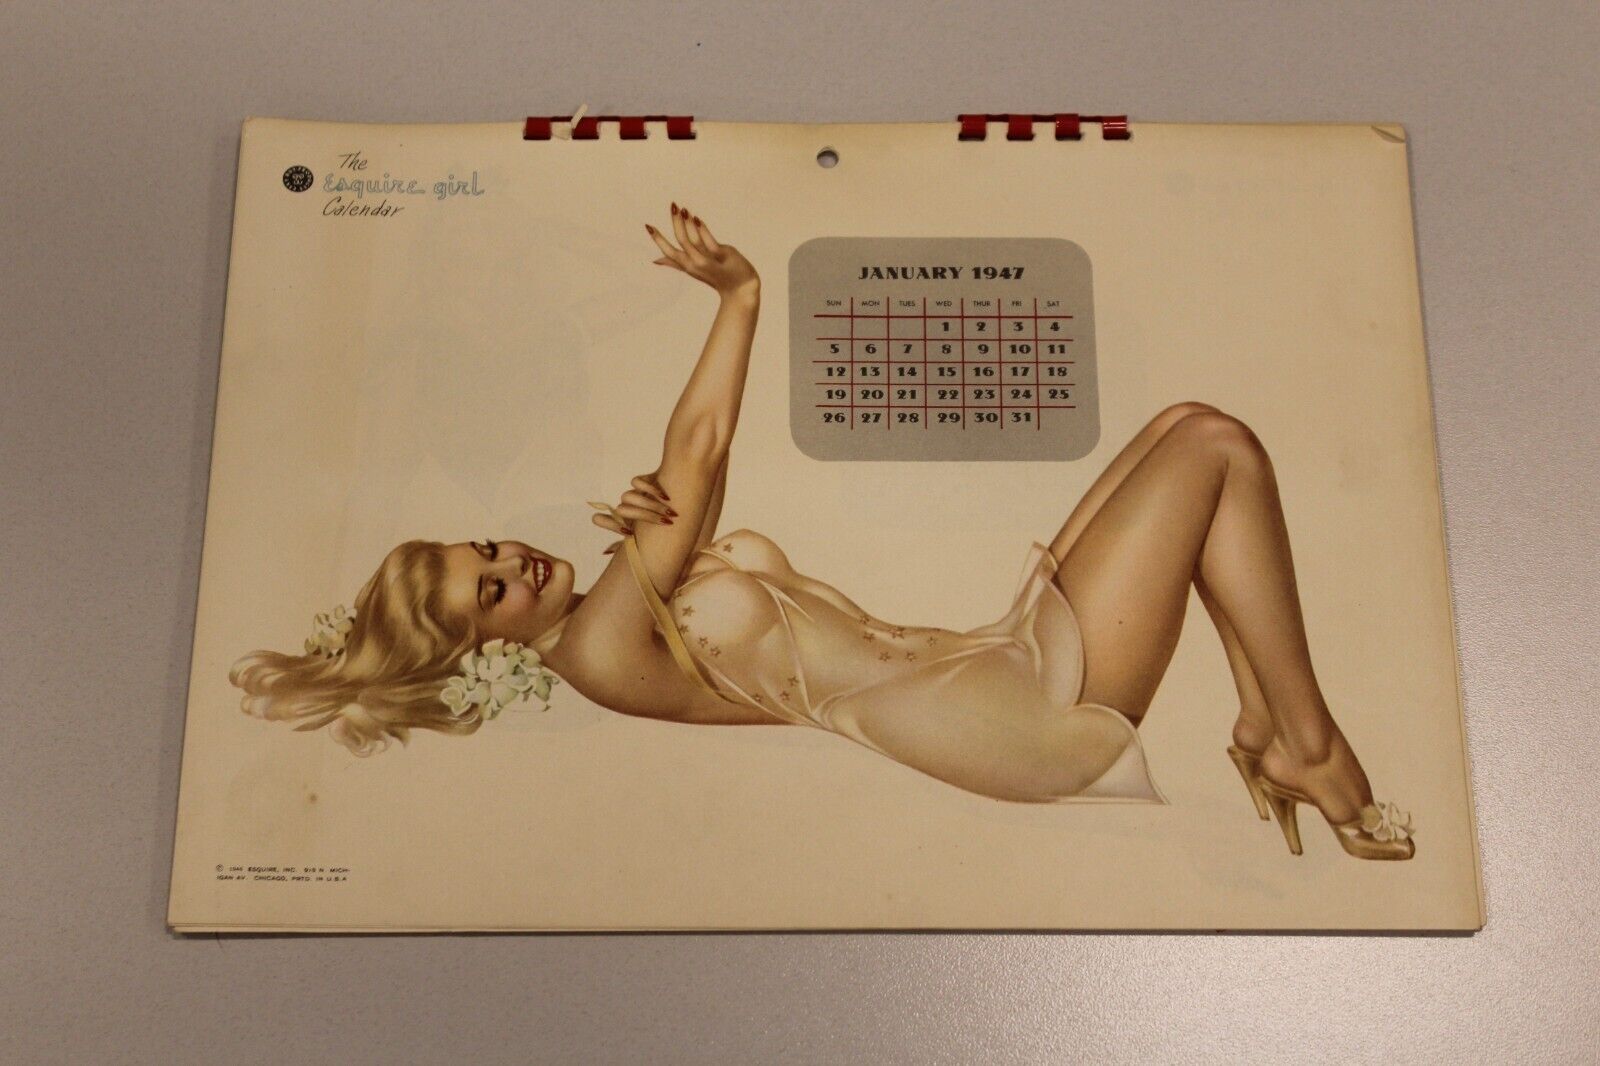 Vintage 1947 The Esquire Girl Calendar pinup art by Vargas- Complete 12 Months